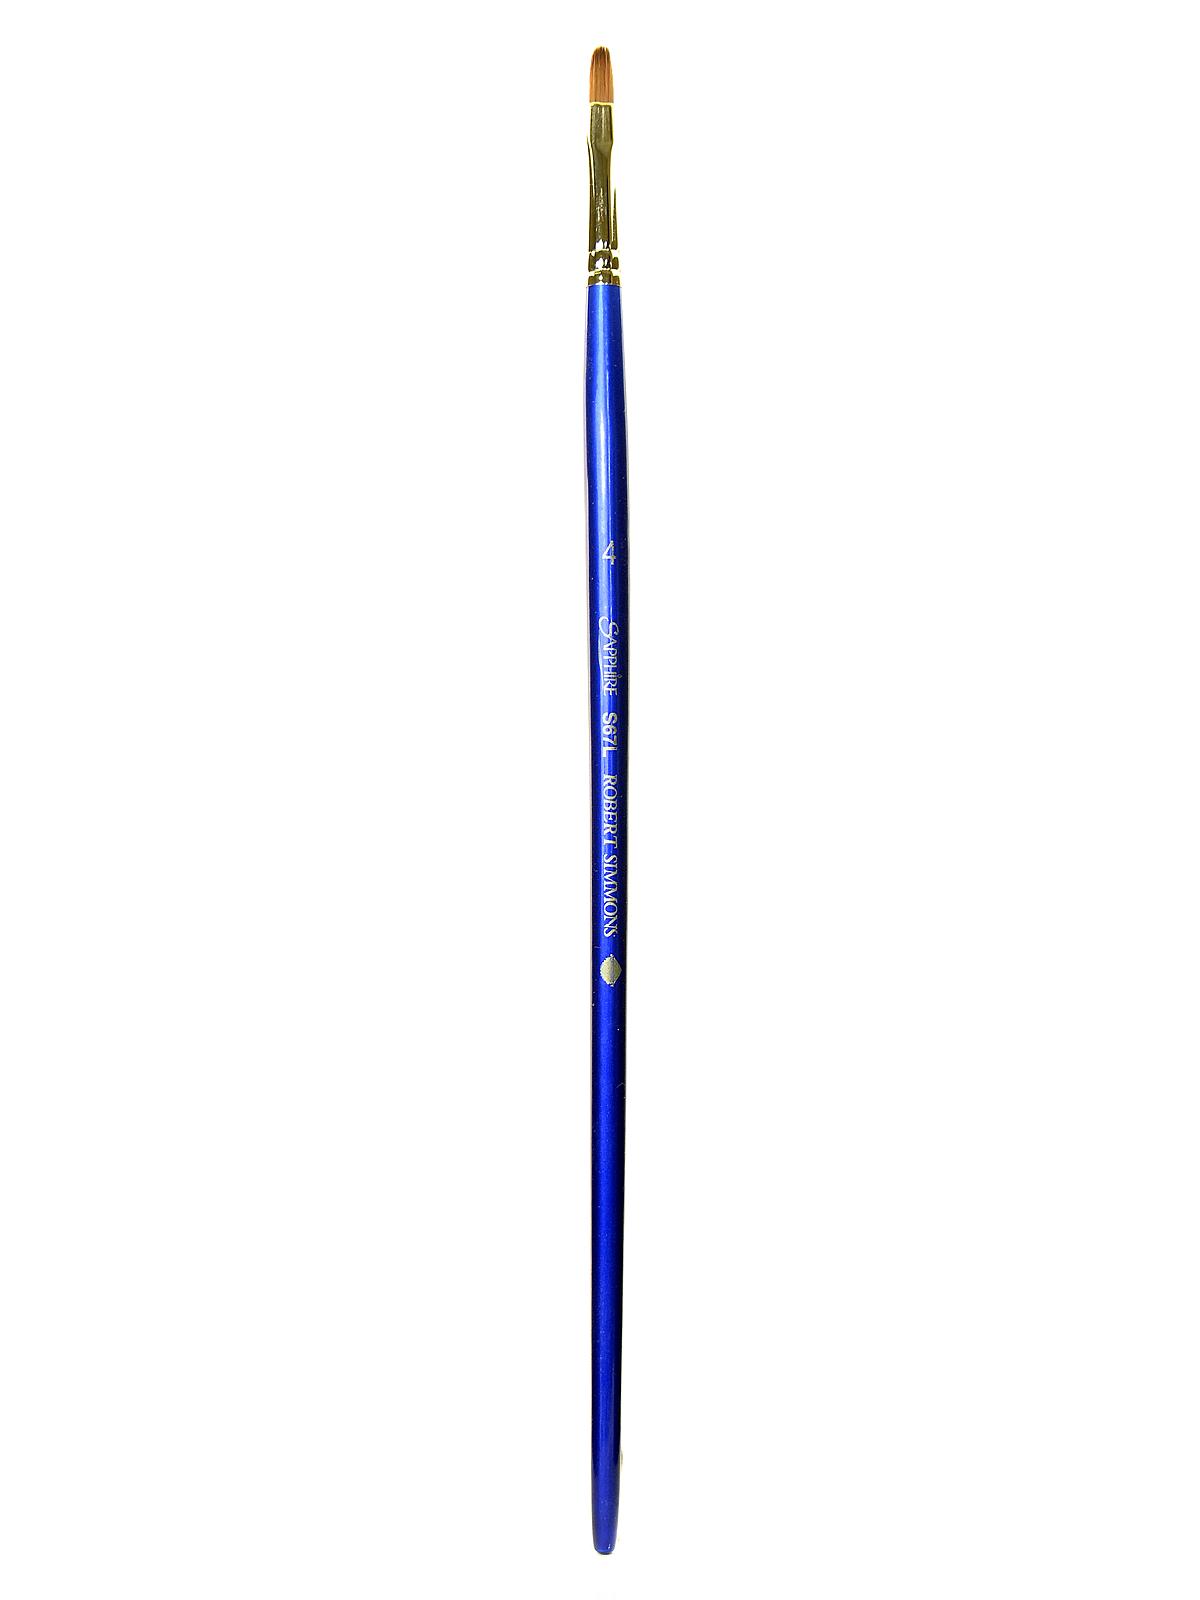 Sapphire Series Synthetic Brushes Long Handle 4 Filbert